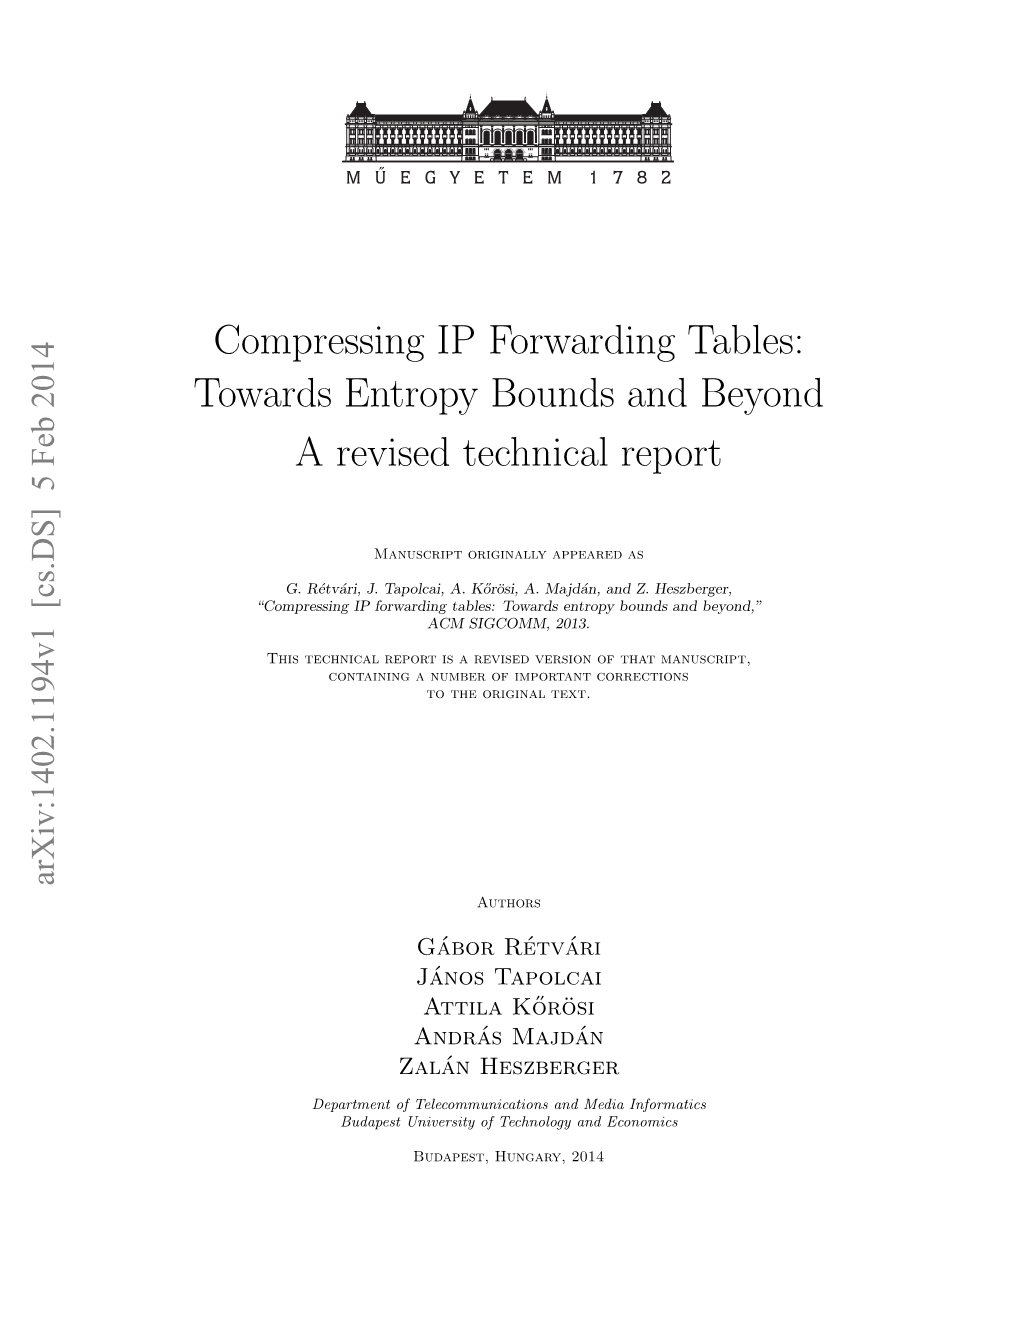 Compressing IP Forwarding Tables: Towards Entropy Bounds and Beyond